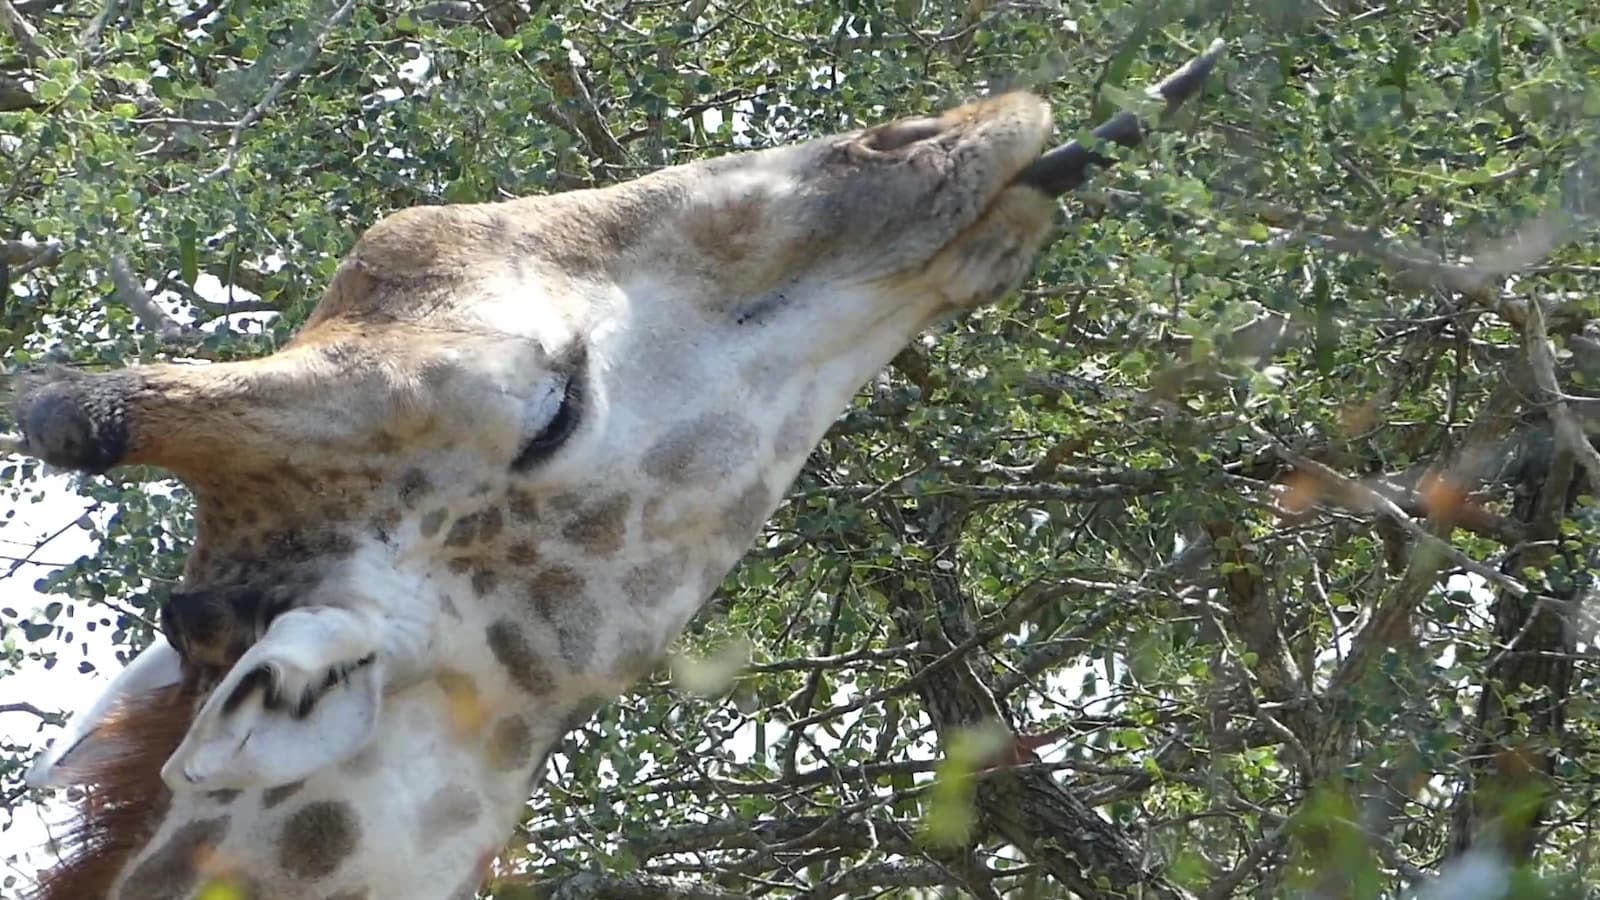 Why is the Giraffe’s Tongue Black? Is it Really as Long as Your Arm?